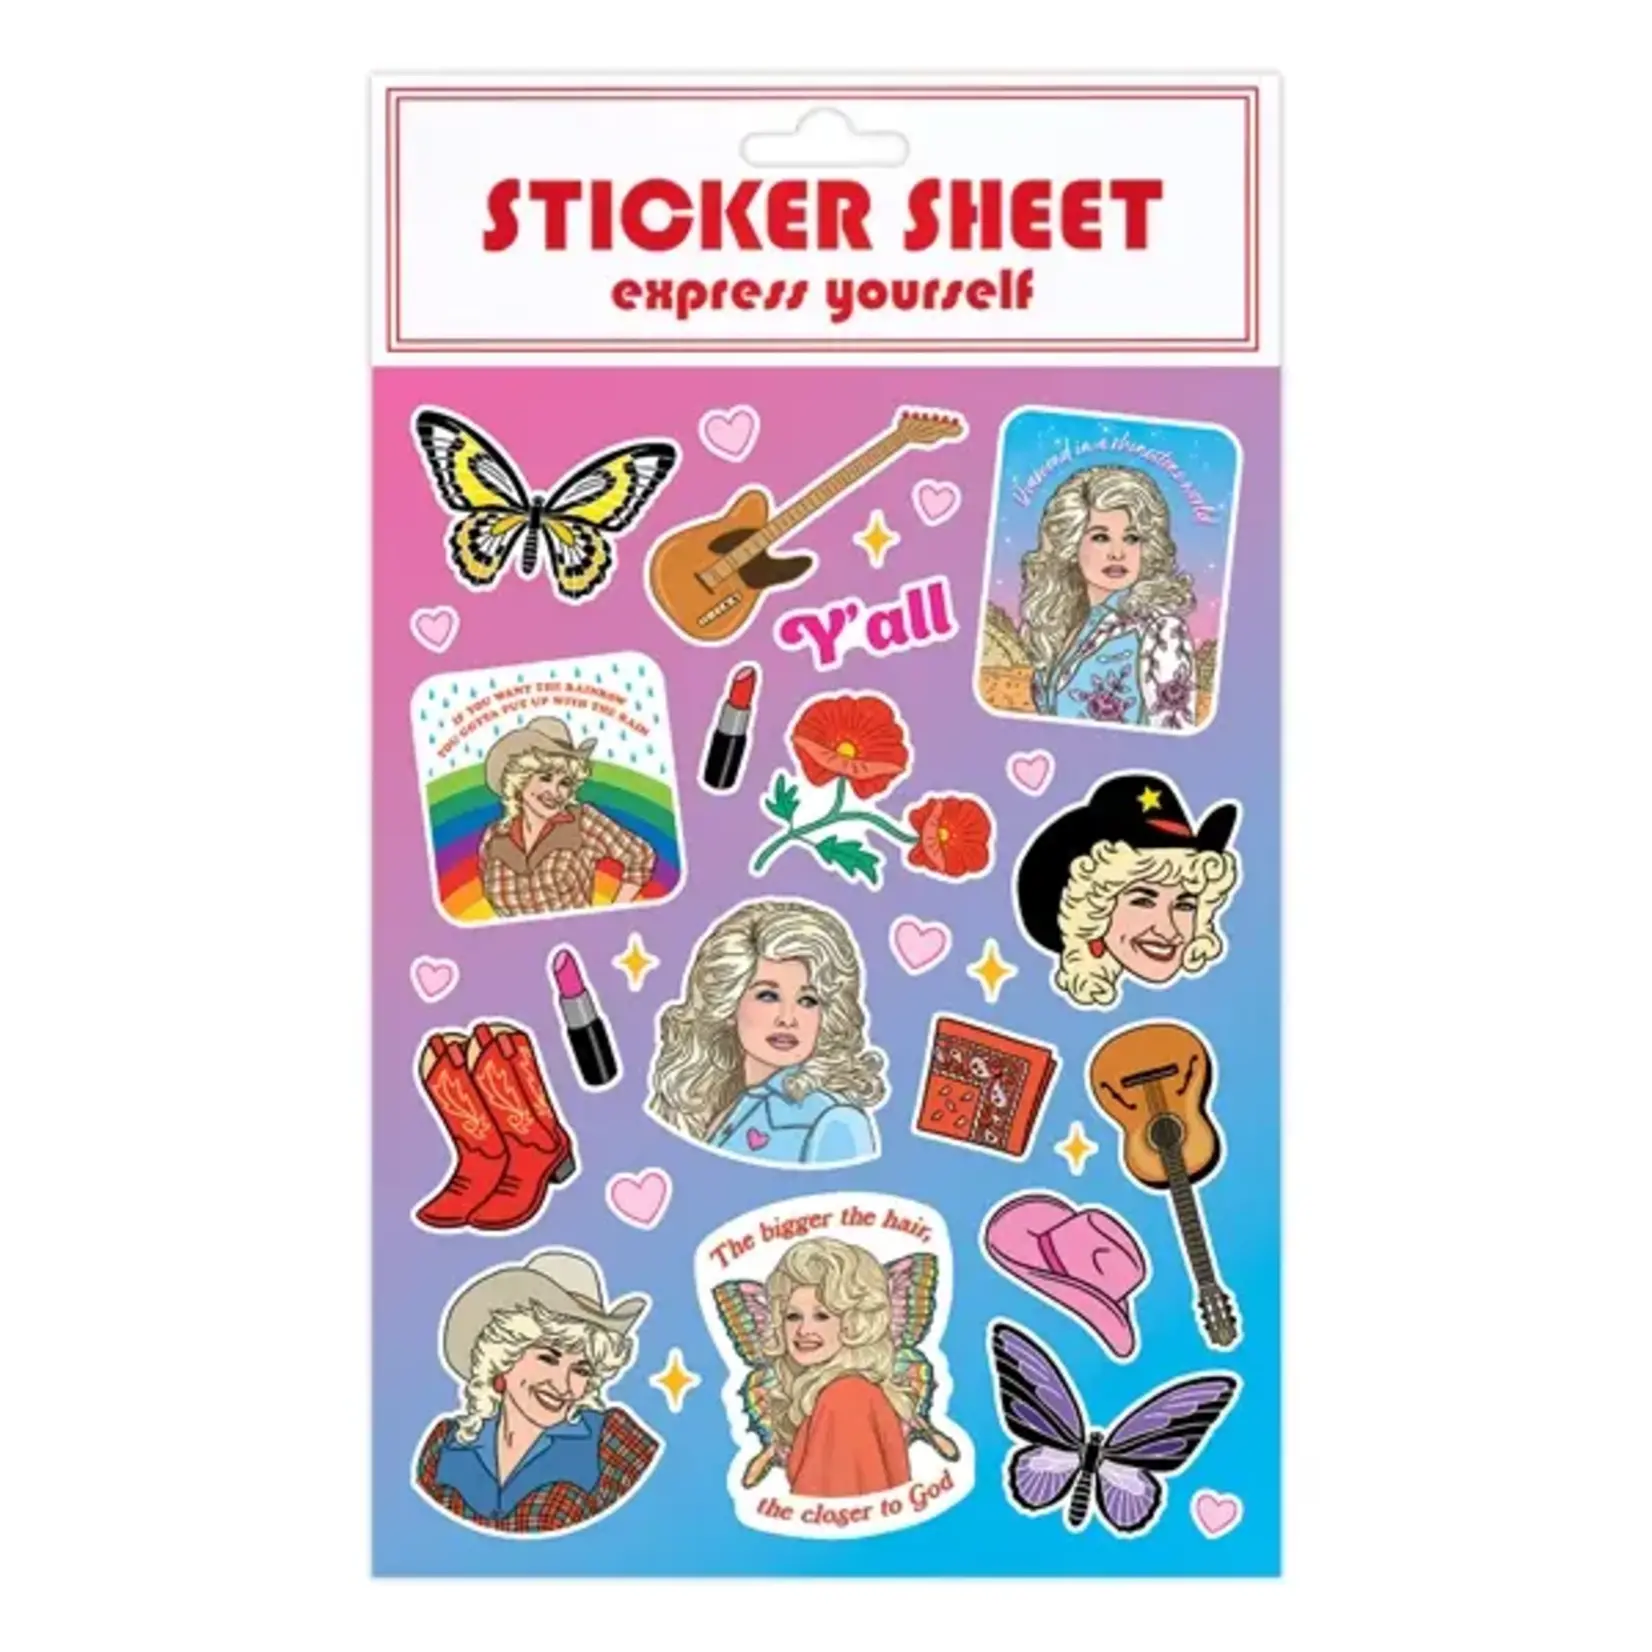 The Found Dolly Cowgirl Sticker Sheet